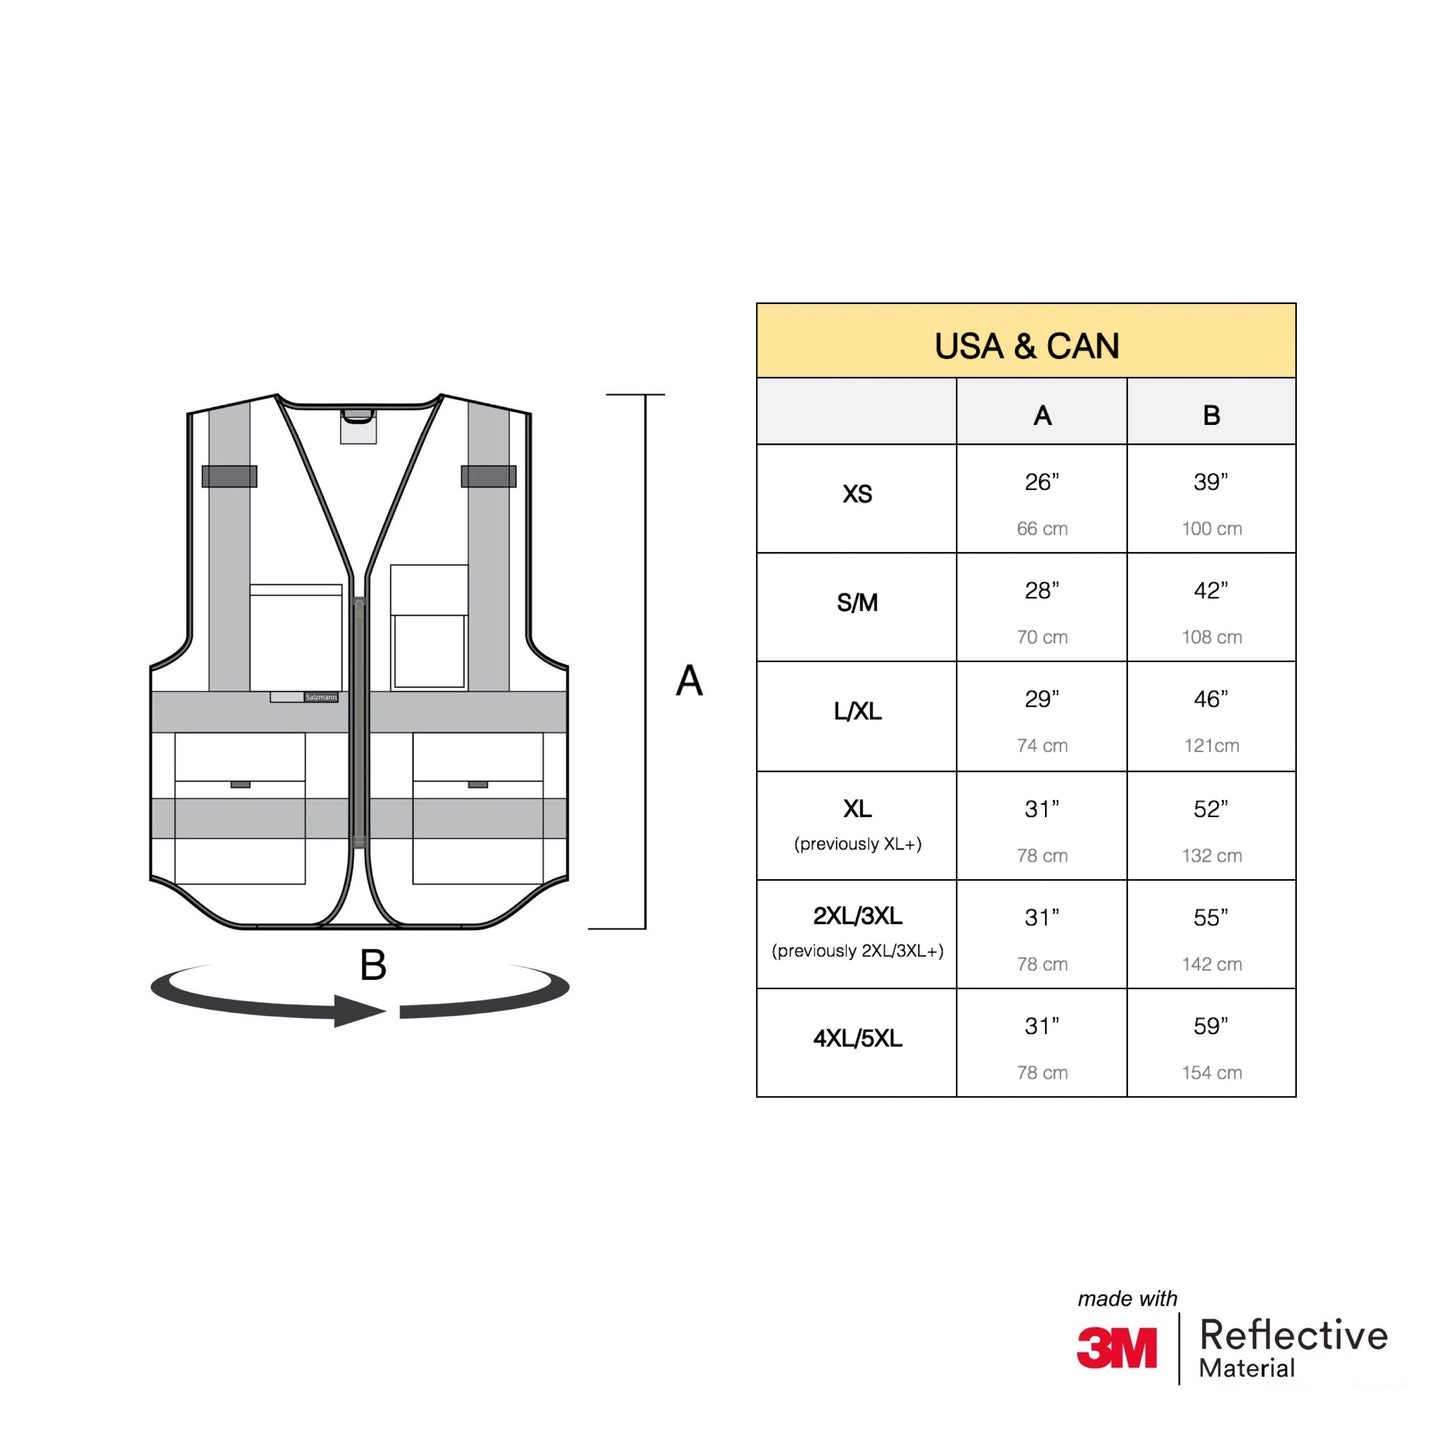 Size chart for the safety vest showing measurements for each different size.